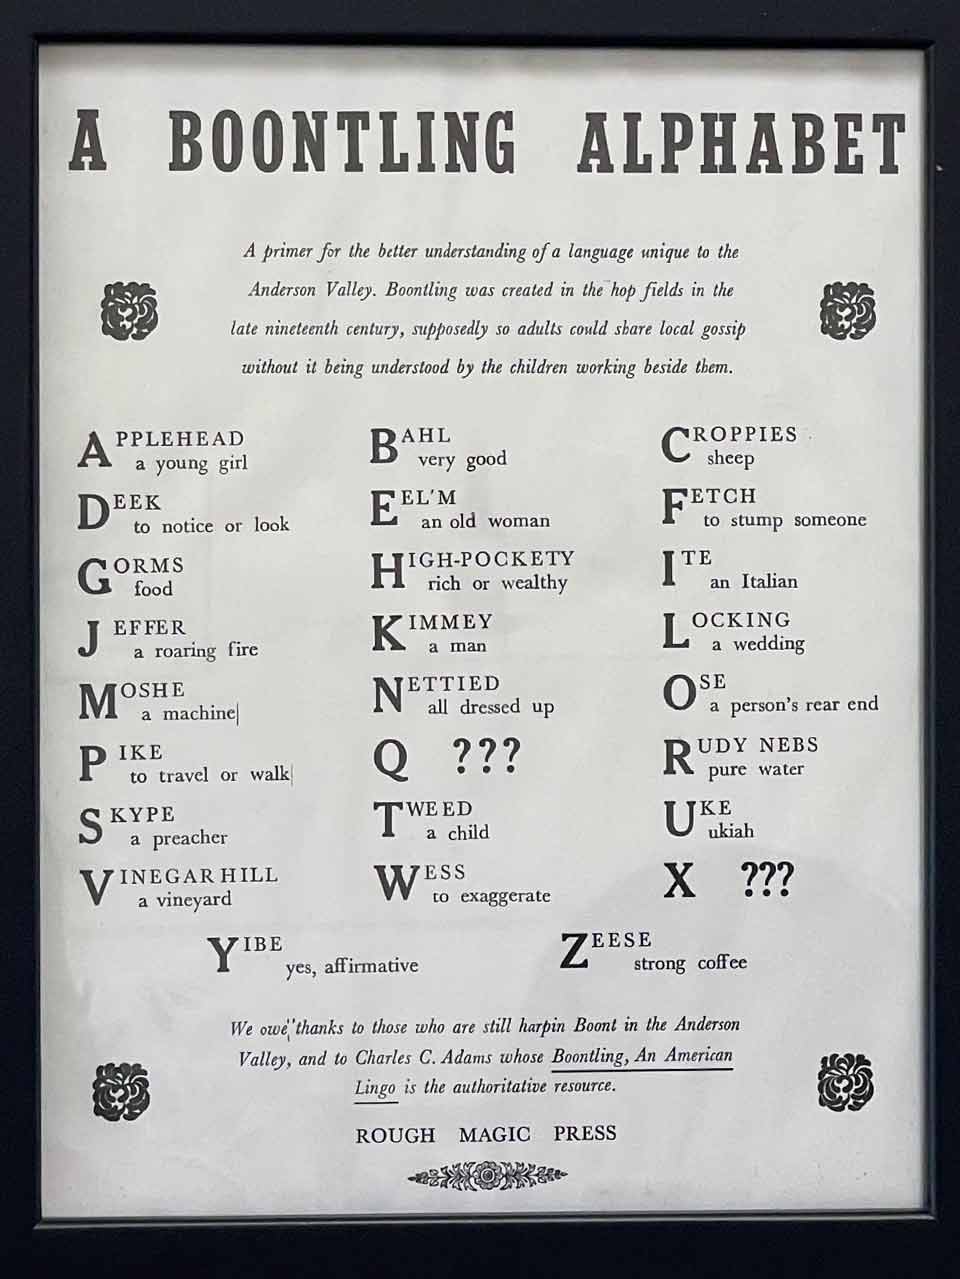 A poster. The text reads: The Boontling Alphabet